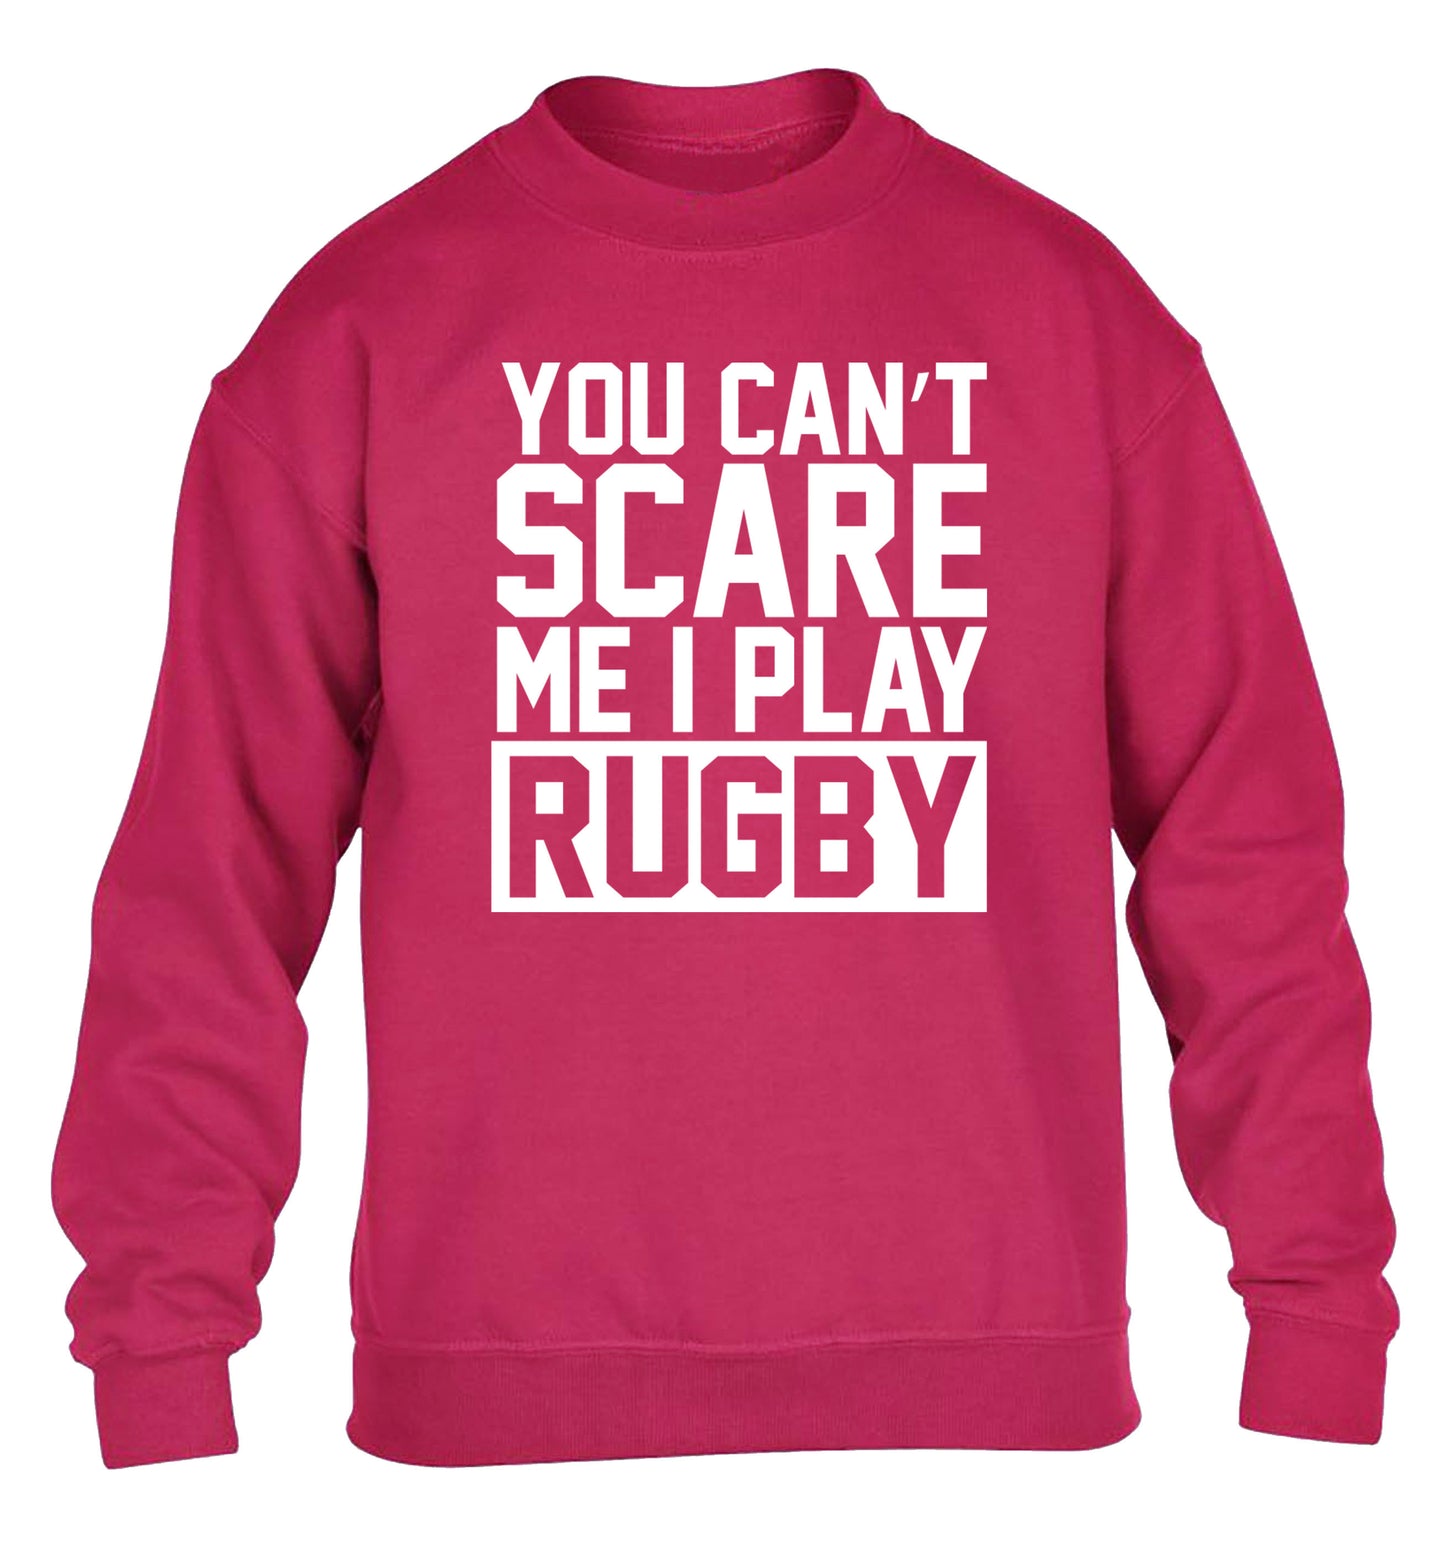 You can't scare me I play rugby children's pink sweater 12-14 Years